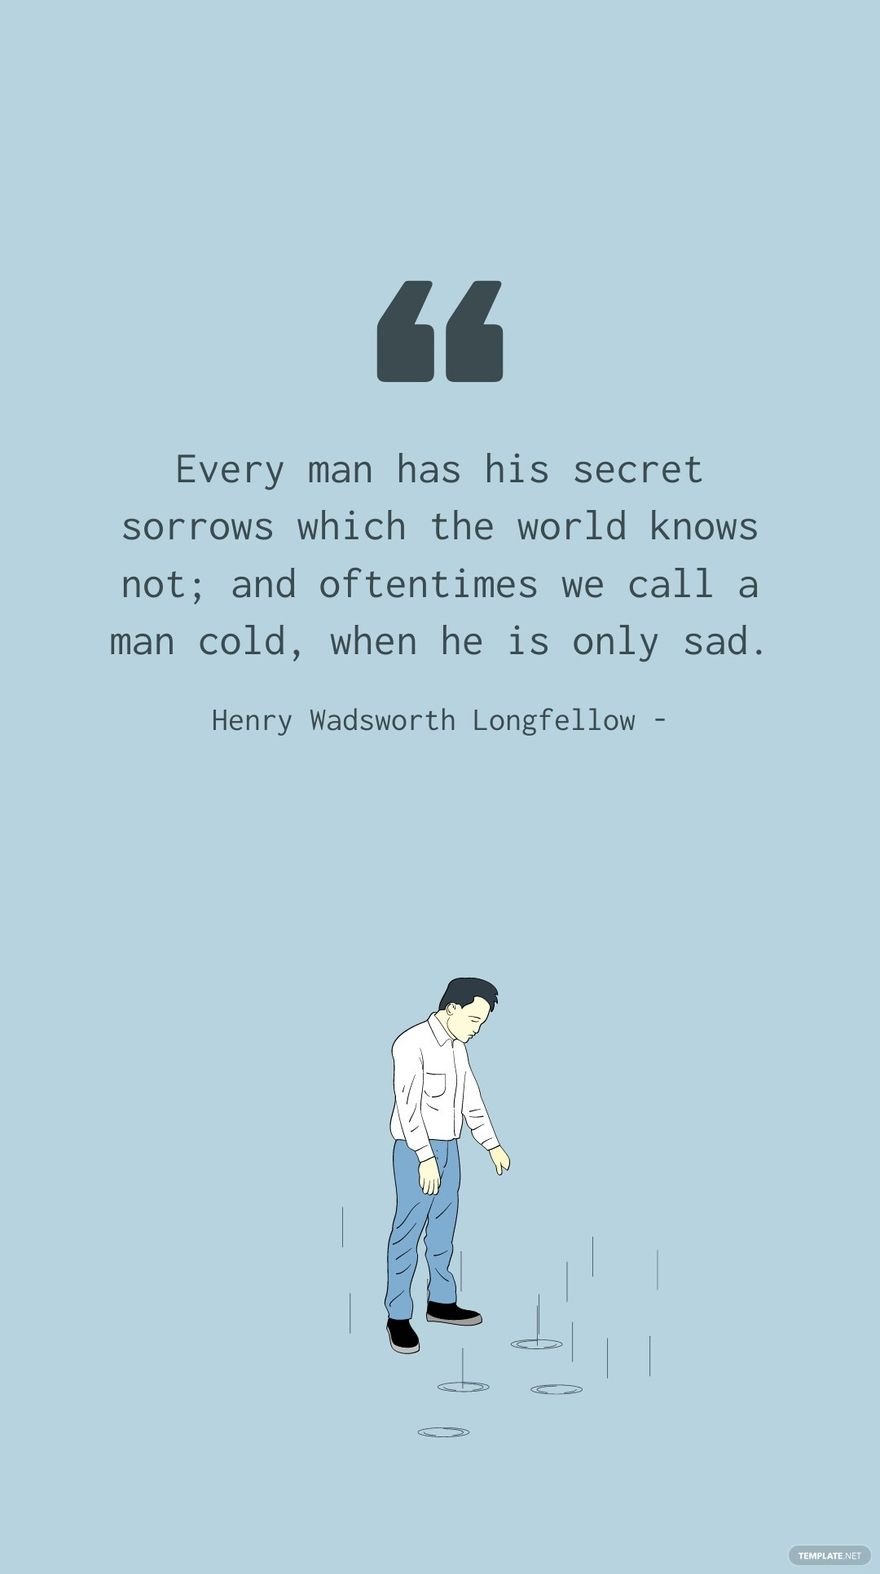 Henry Wadsworth Longfellow - Every man has his secret sorrows which the world knows not; and oftentimes we call a man cold, when he is only sad.